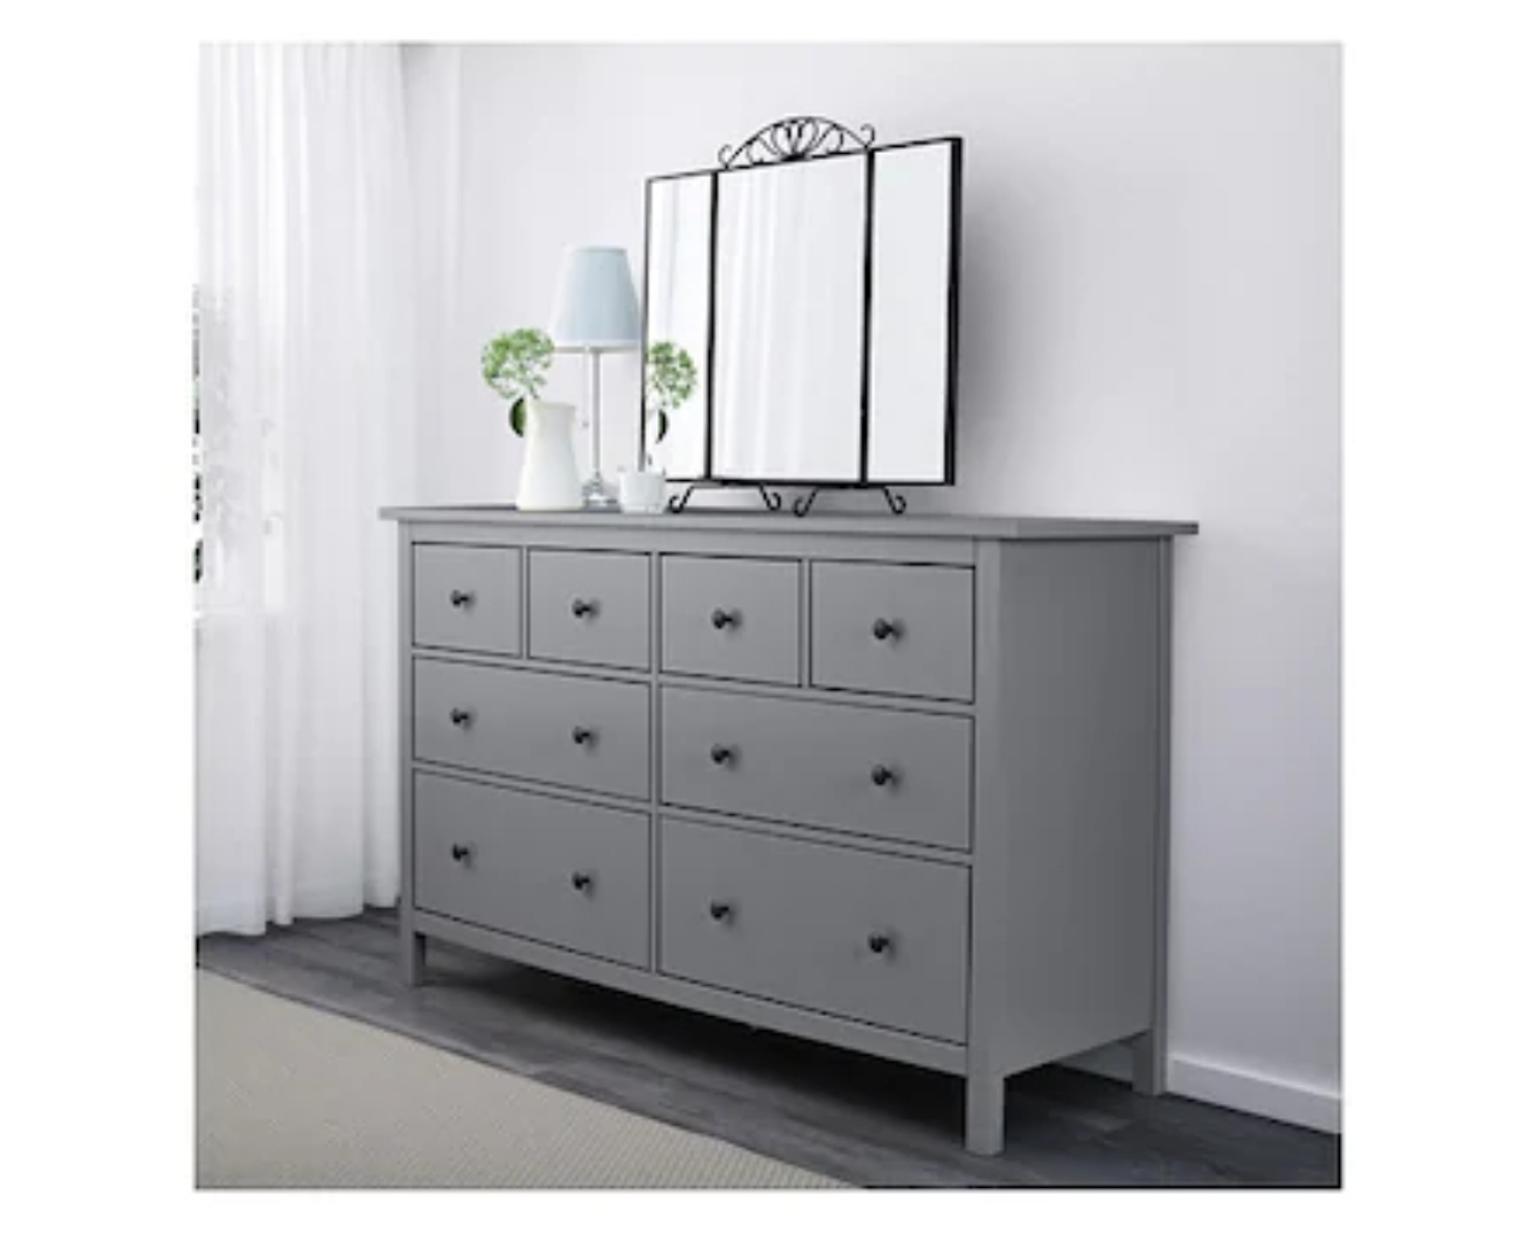 Ikea Chest Of 8 Drawers Hemnes In Le2 Leicester Fur 225 00 Zum